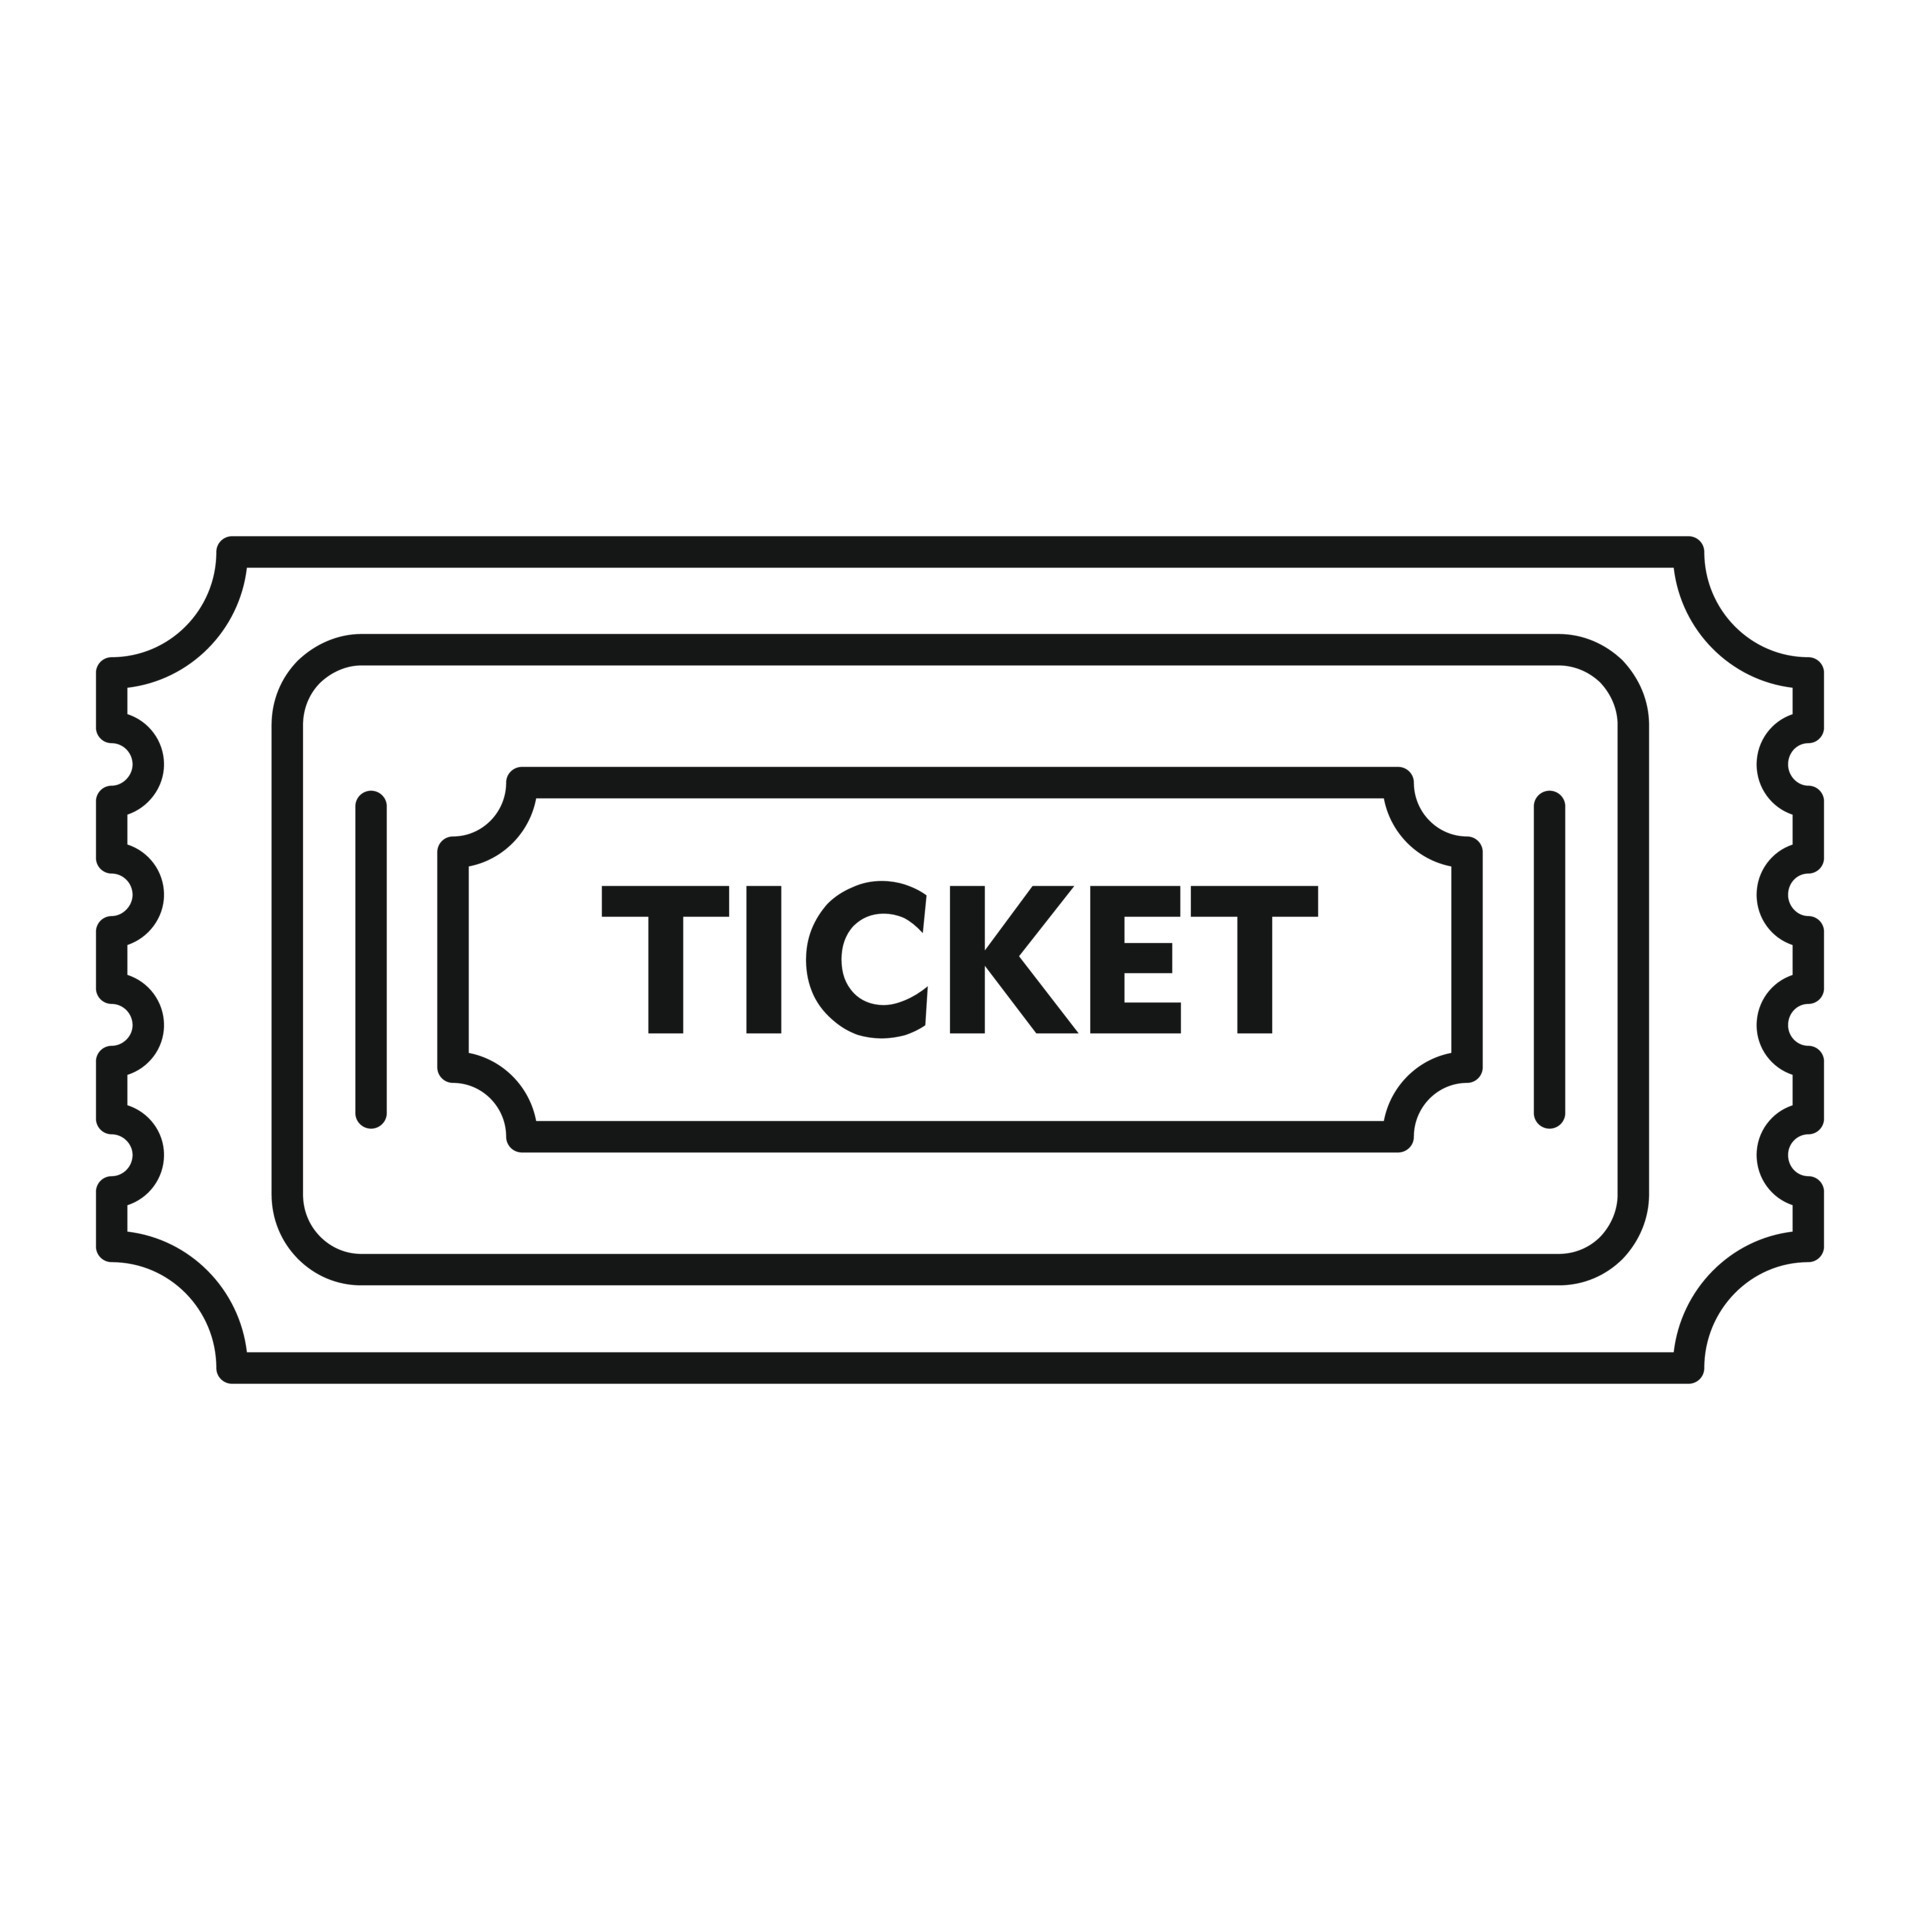 Entrance bus ticket icon, outline style 14643016 Vector Art at